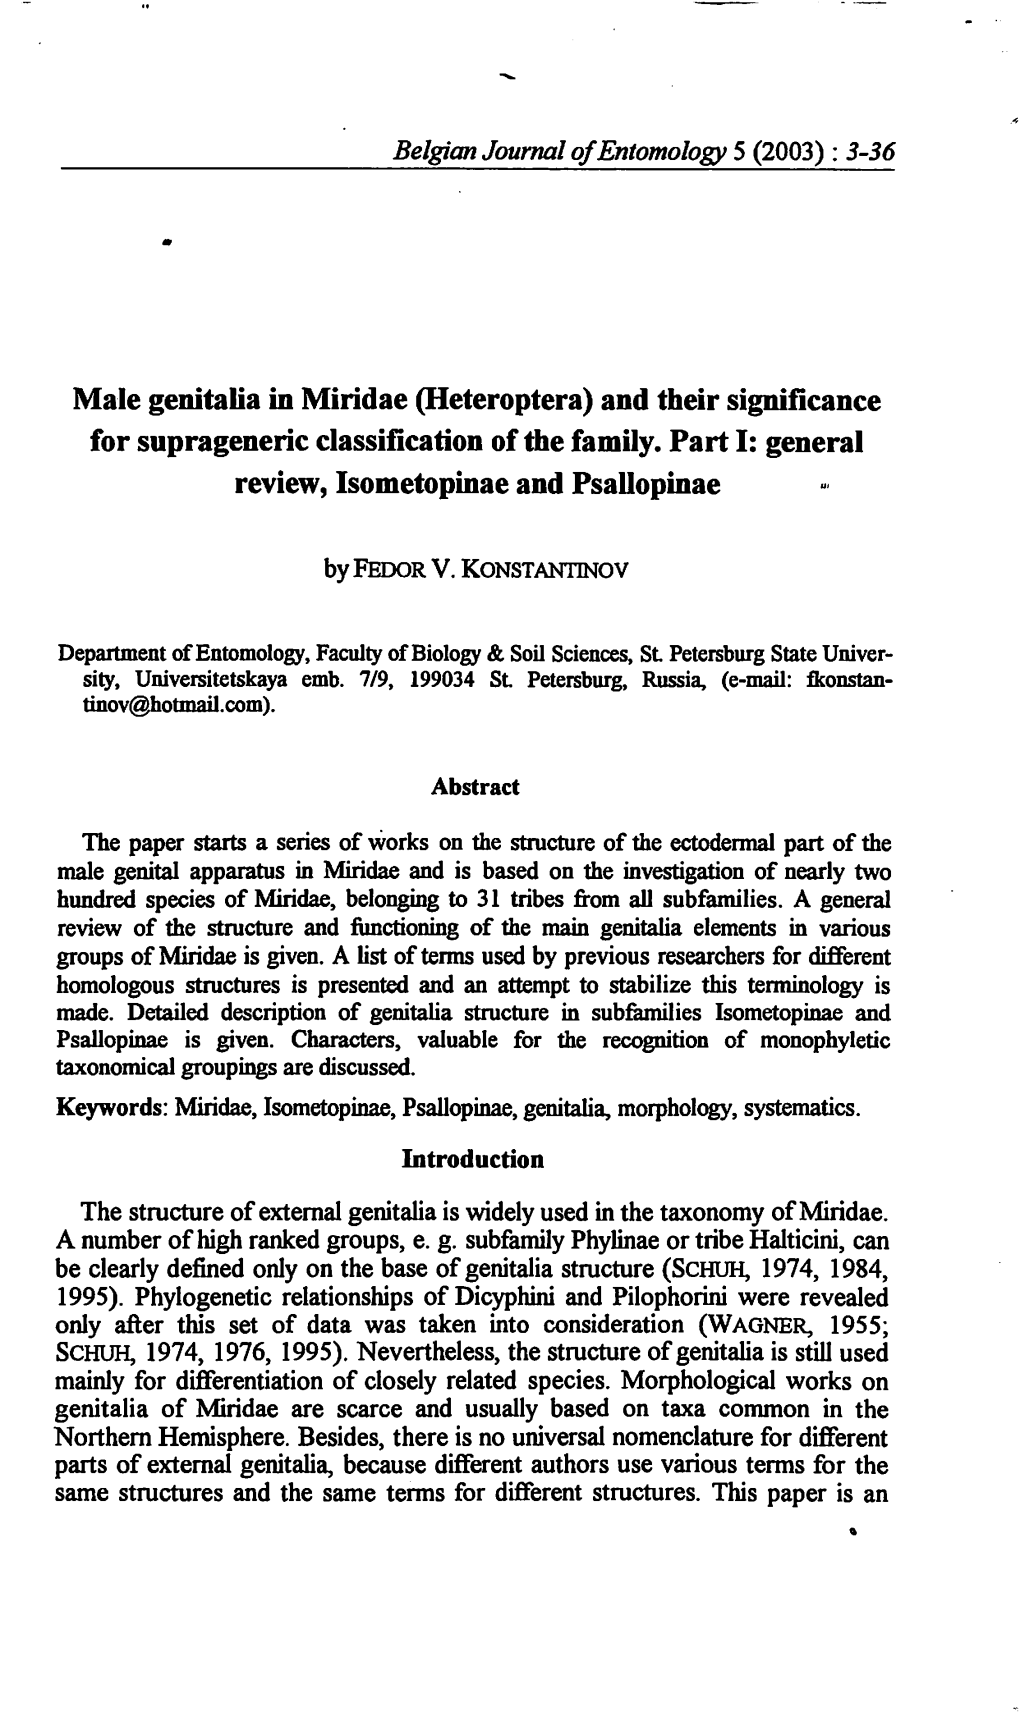 Male Genitalia in Miridae (Heteroptera) and Their Significance for Suprageneric Classification of the Family